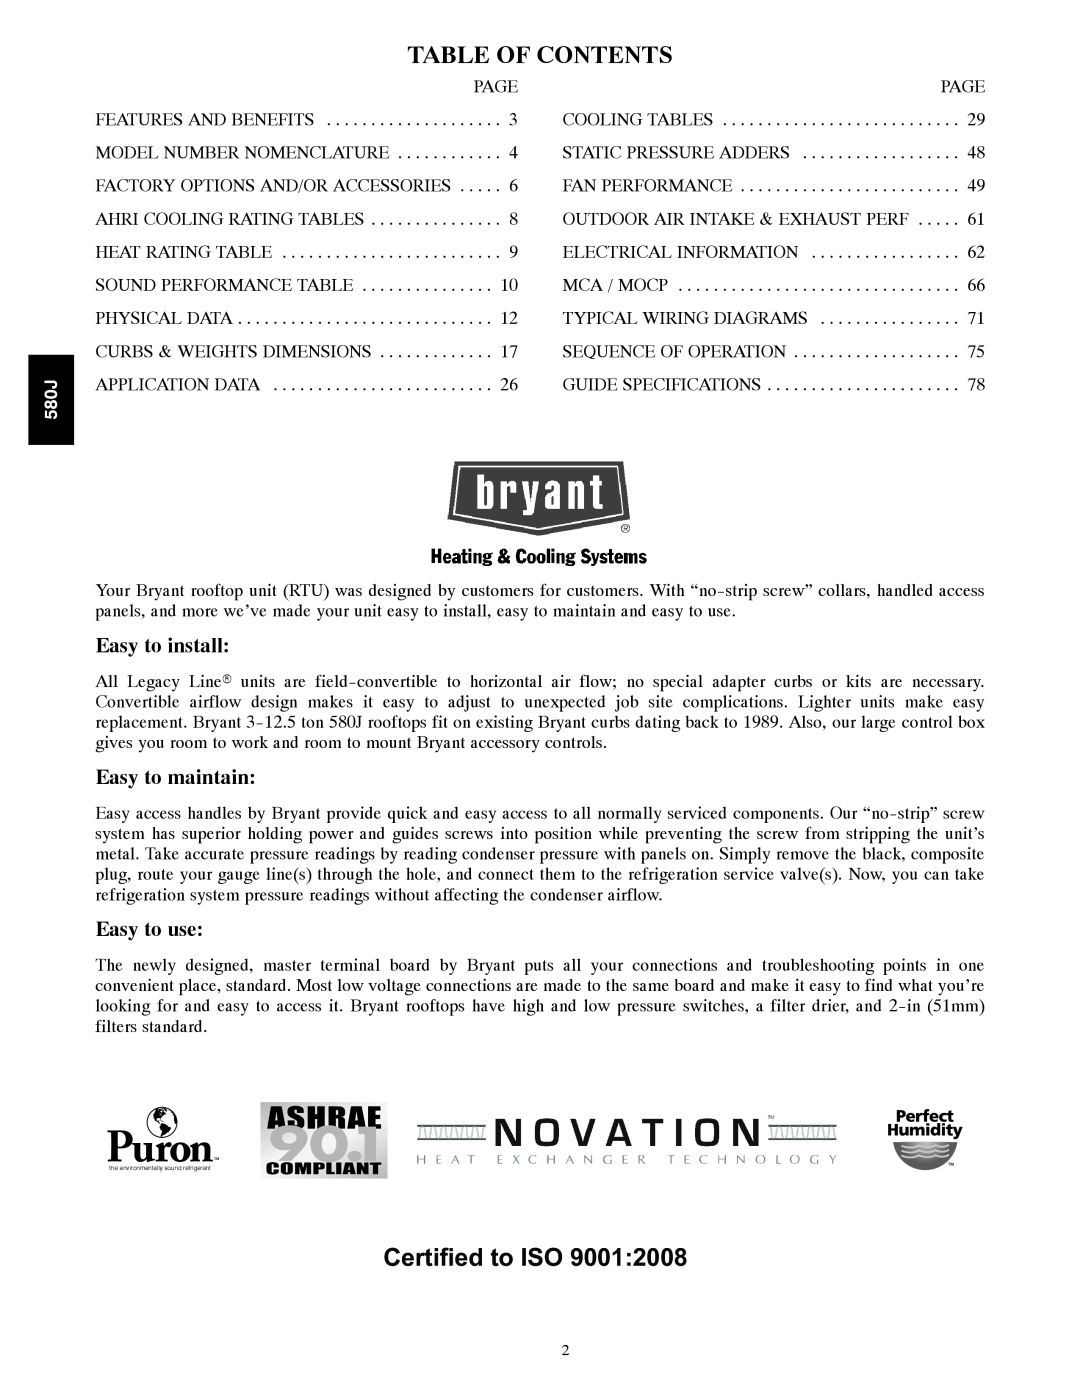 Bryant 580J manual Table Of Contents, Certified to ISO 9001:2008 